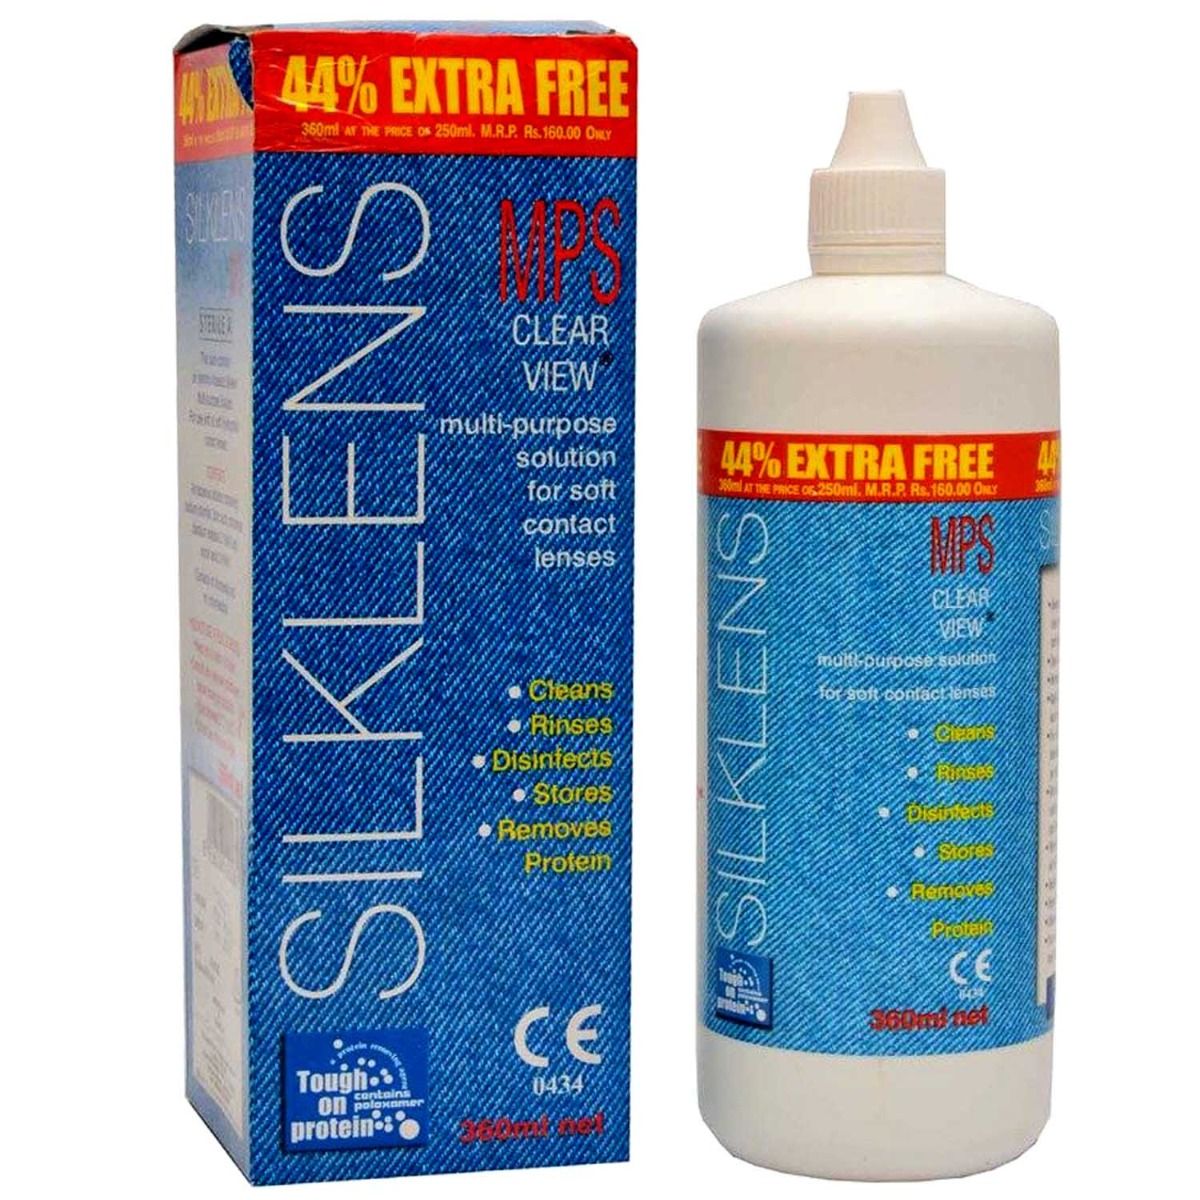 Silklens MPS Clear View Multi-Purpose Solution, 360 ml, Pack of 1 